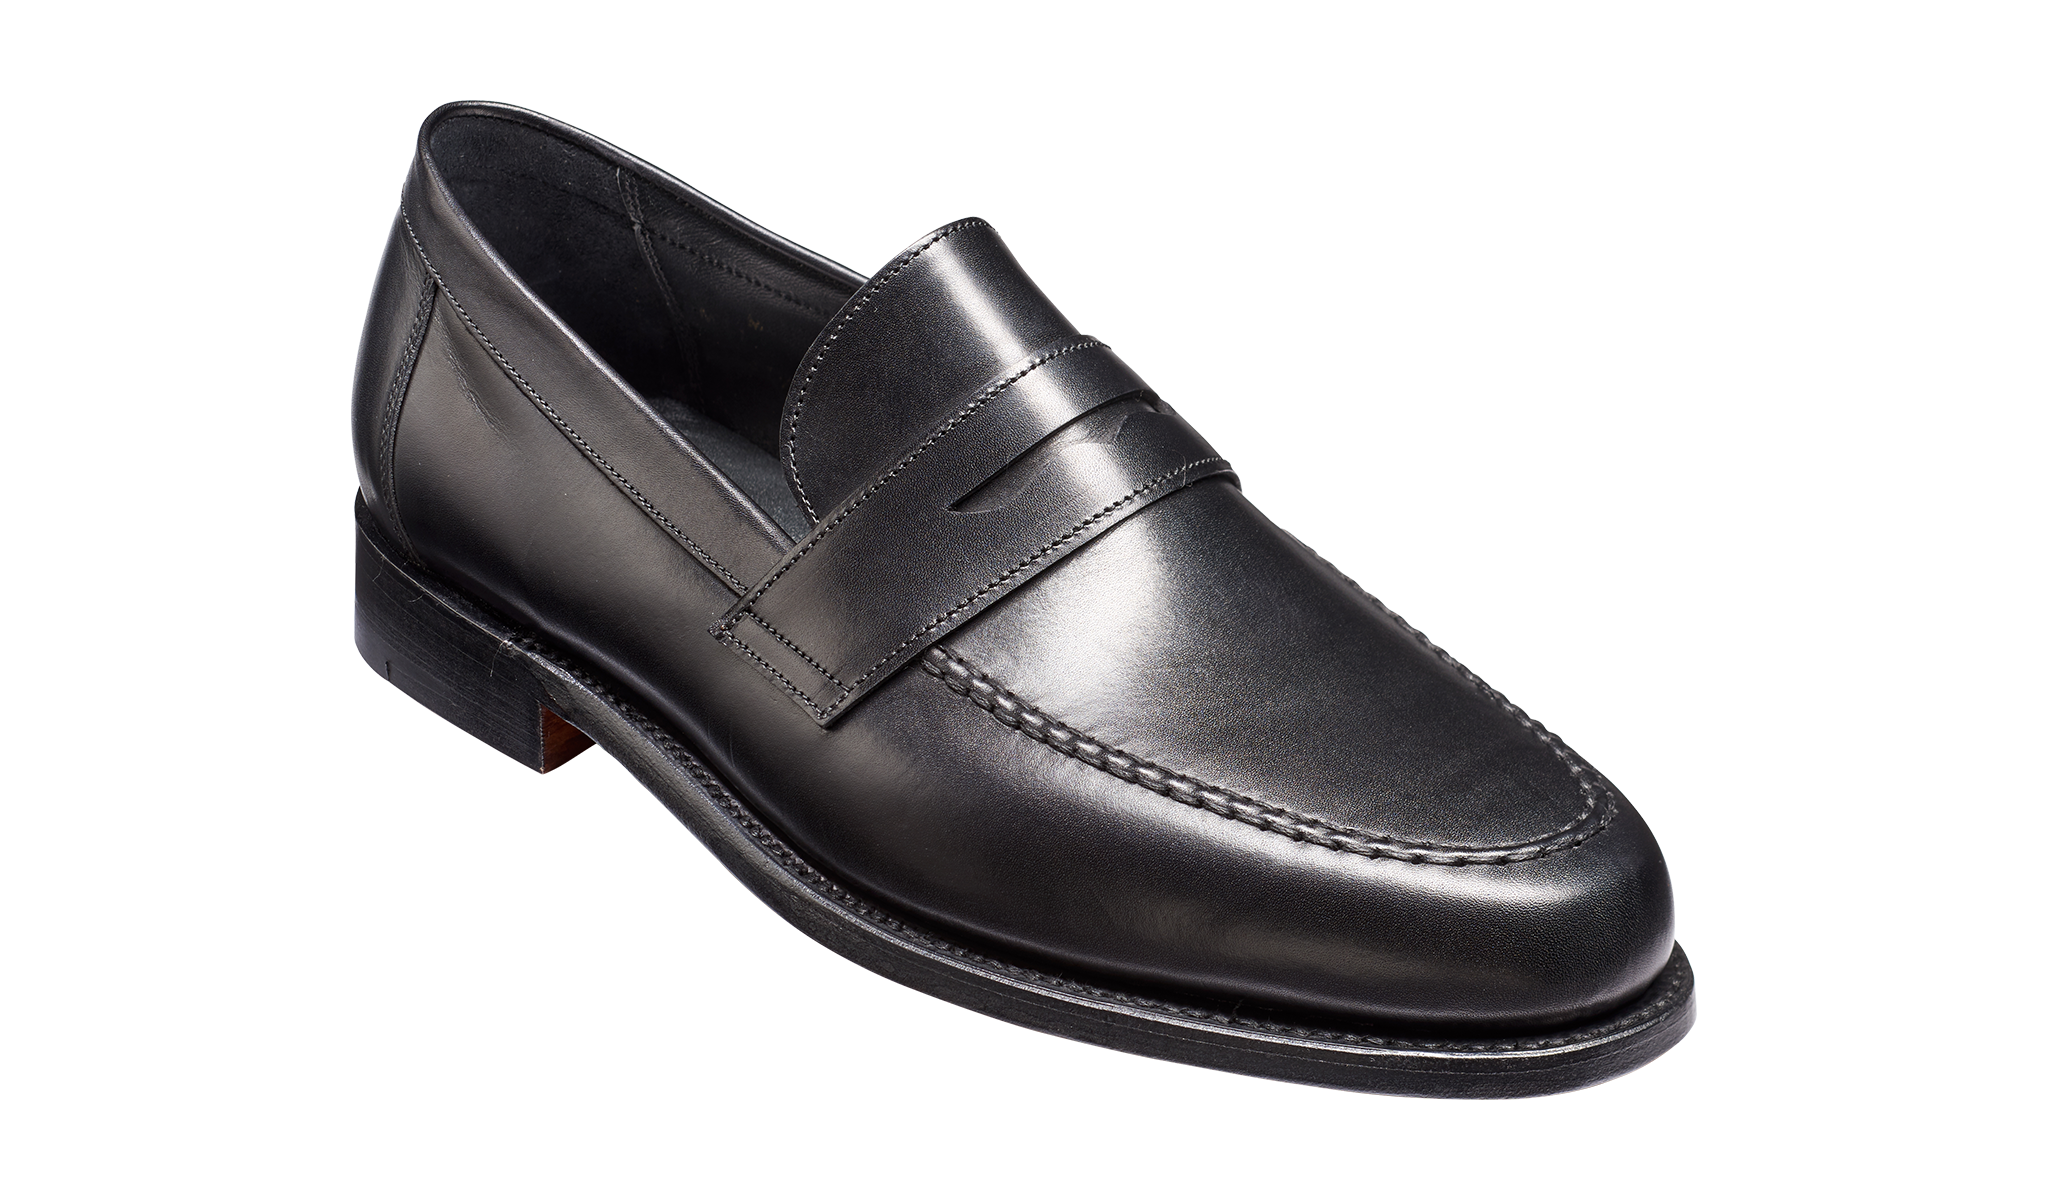 Jevington - A men's black handmade leather loafers by Barker Shoes.